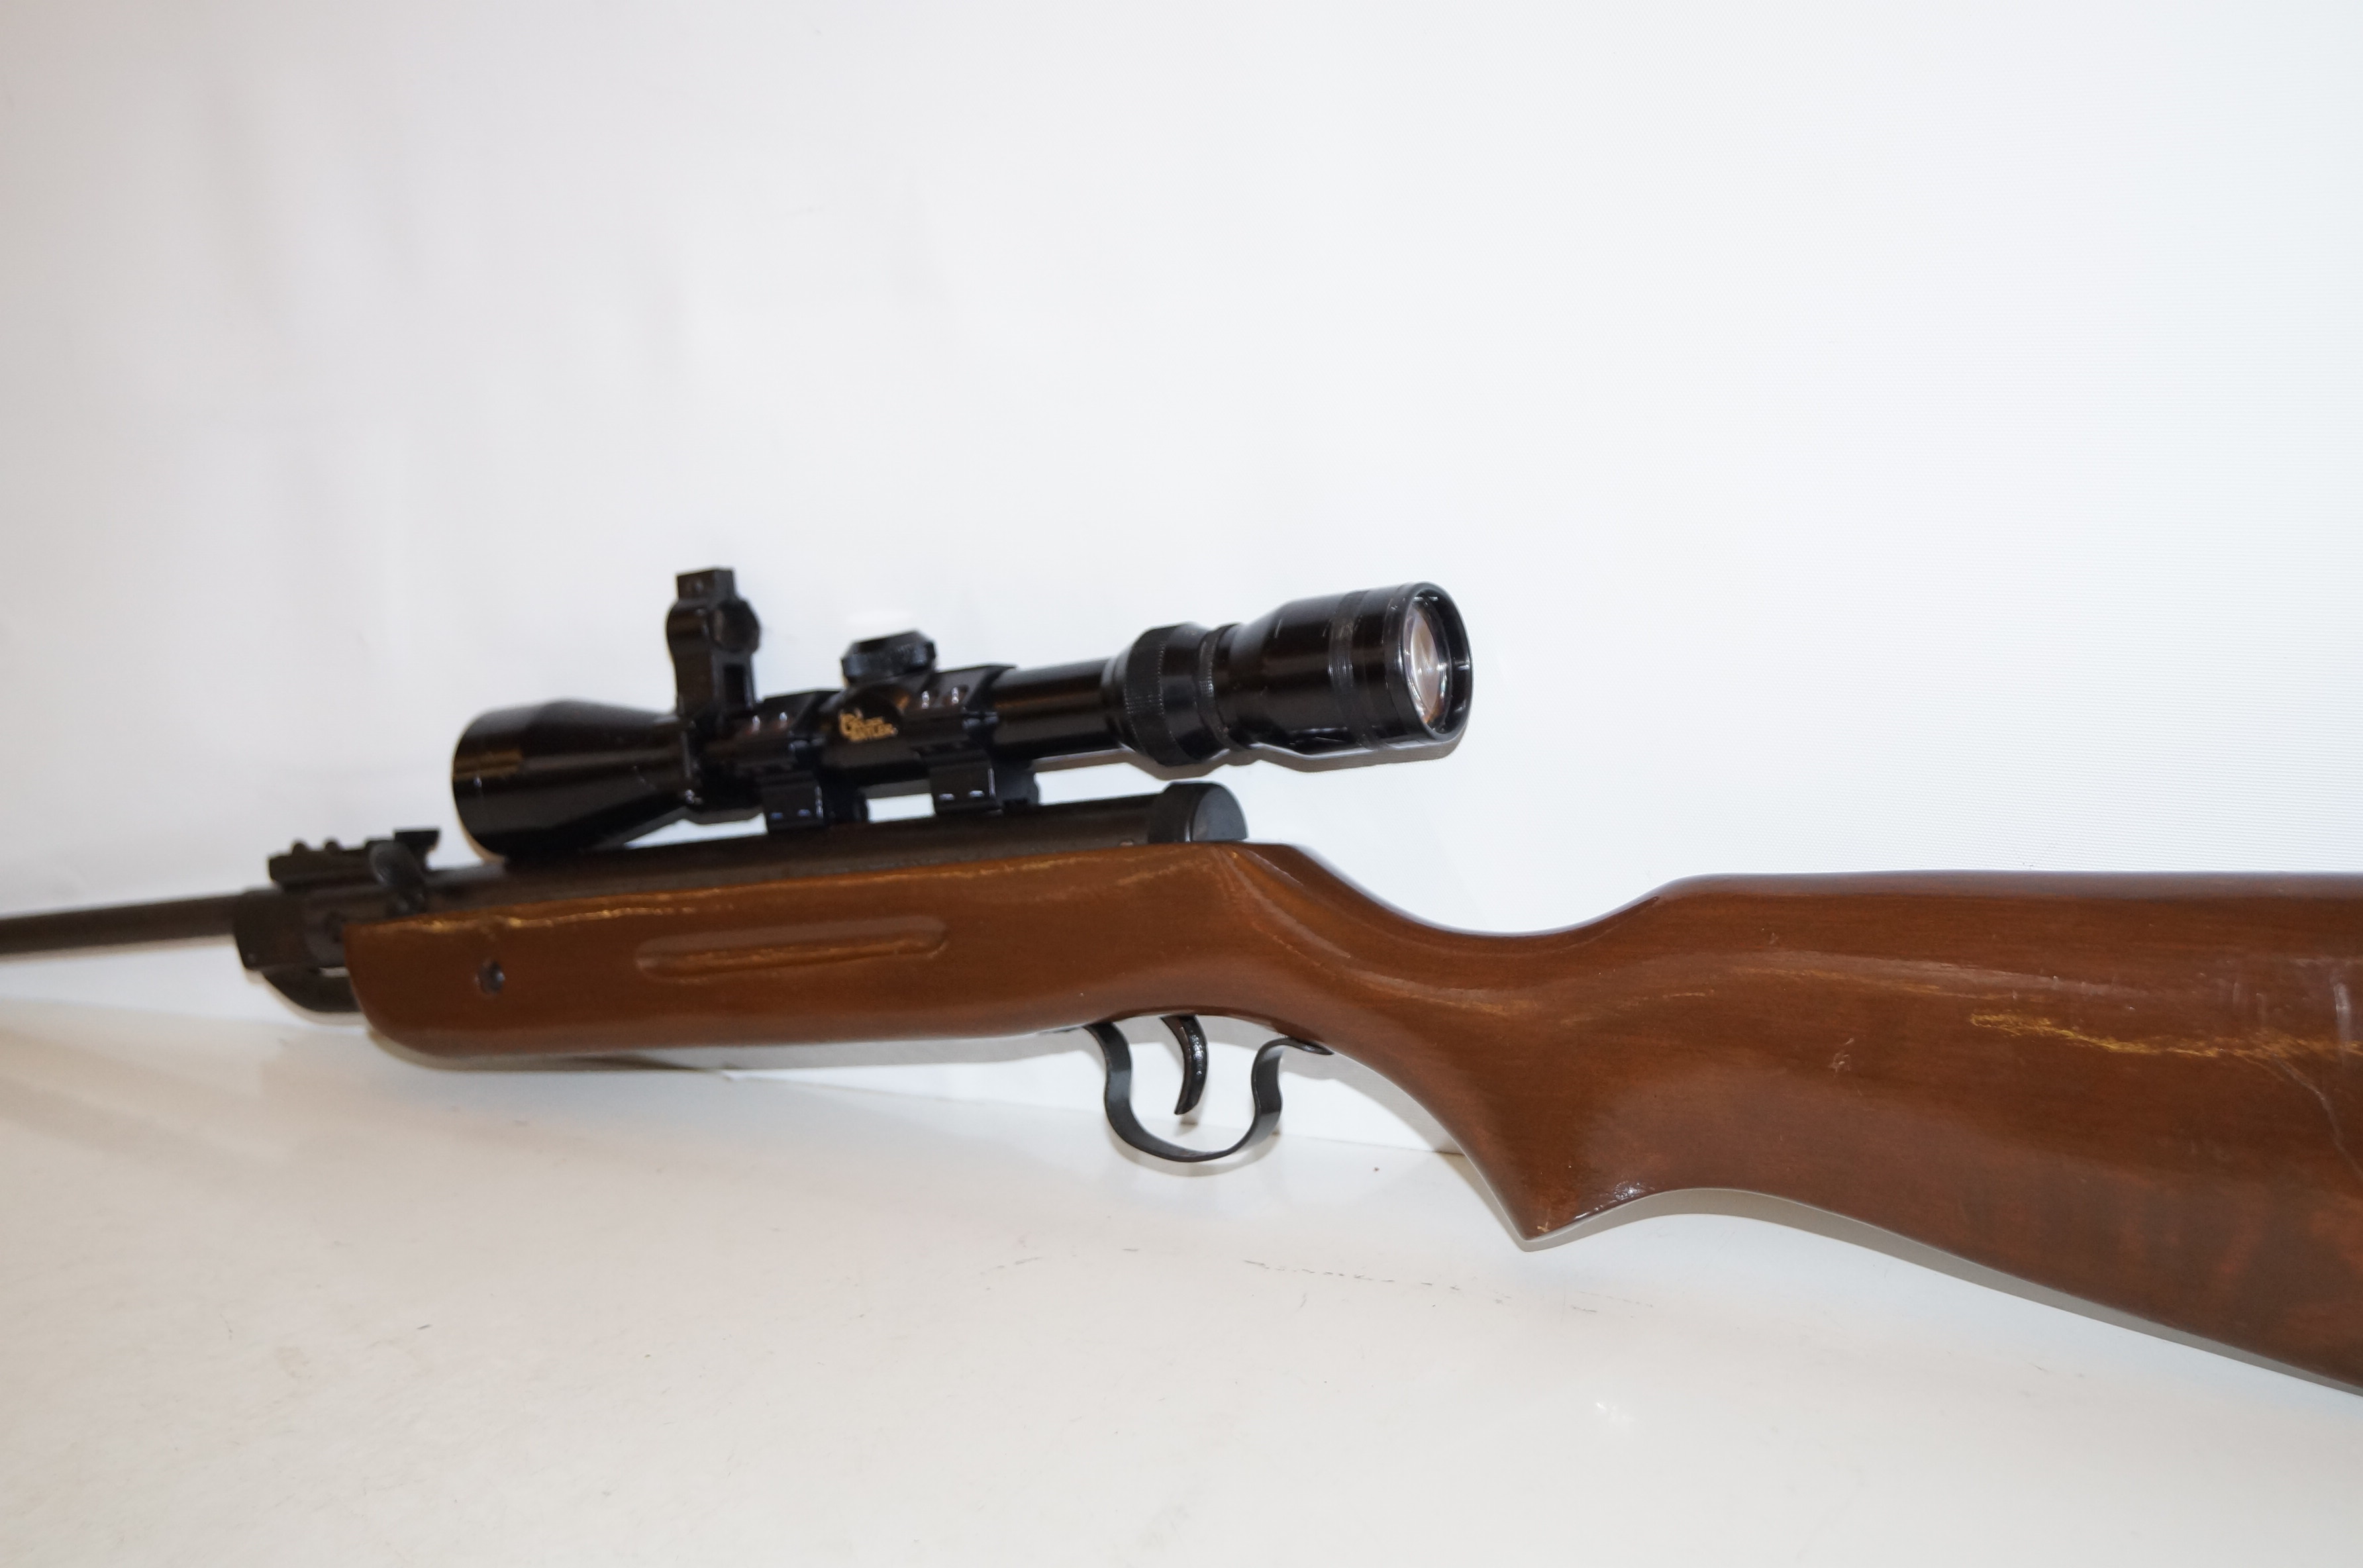 .22 air rifle with scope with cleaning kit